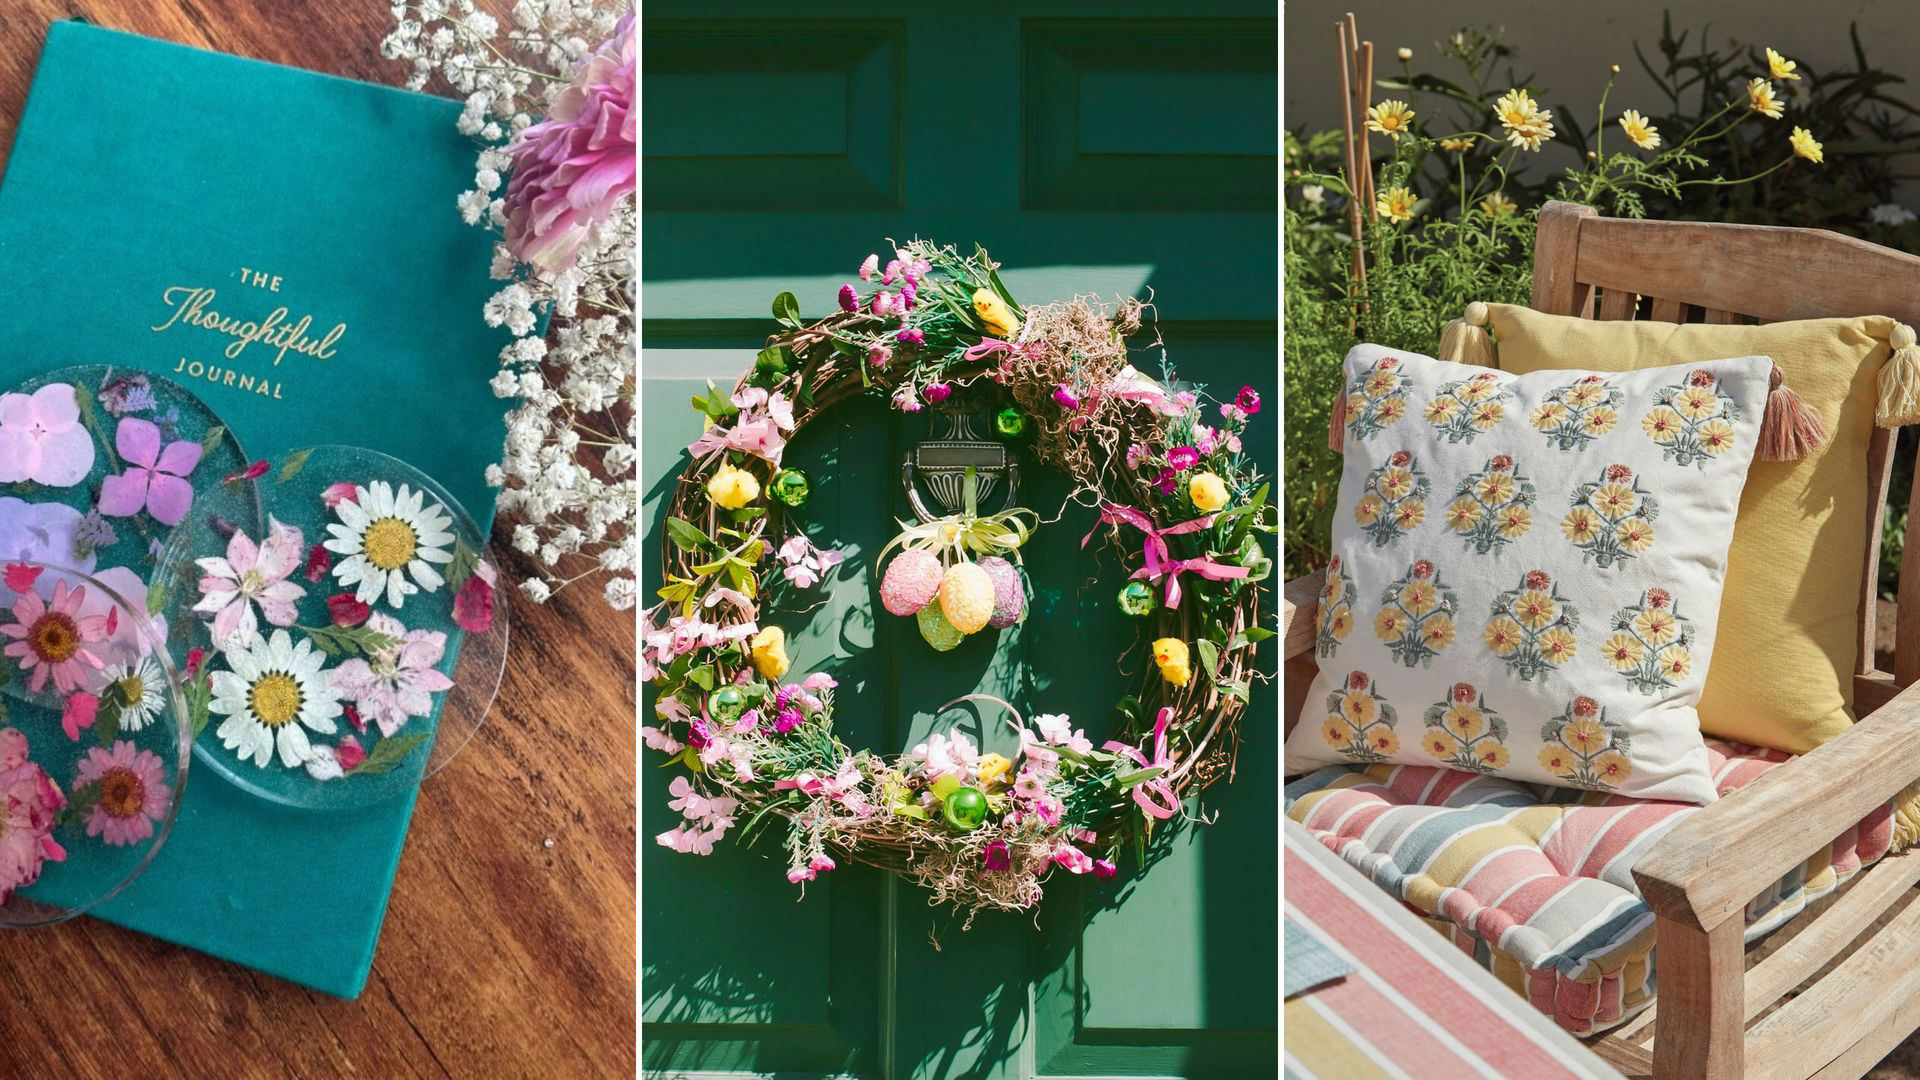 7 easy spring DIY ideas to get crafting with this season